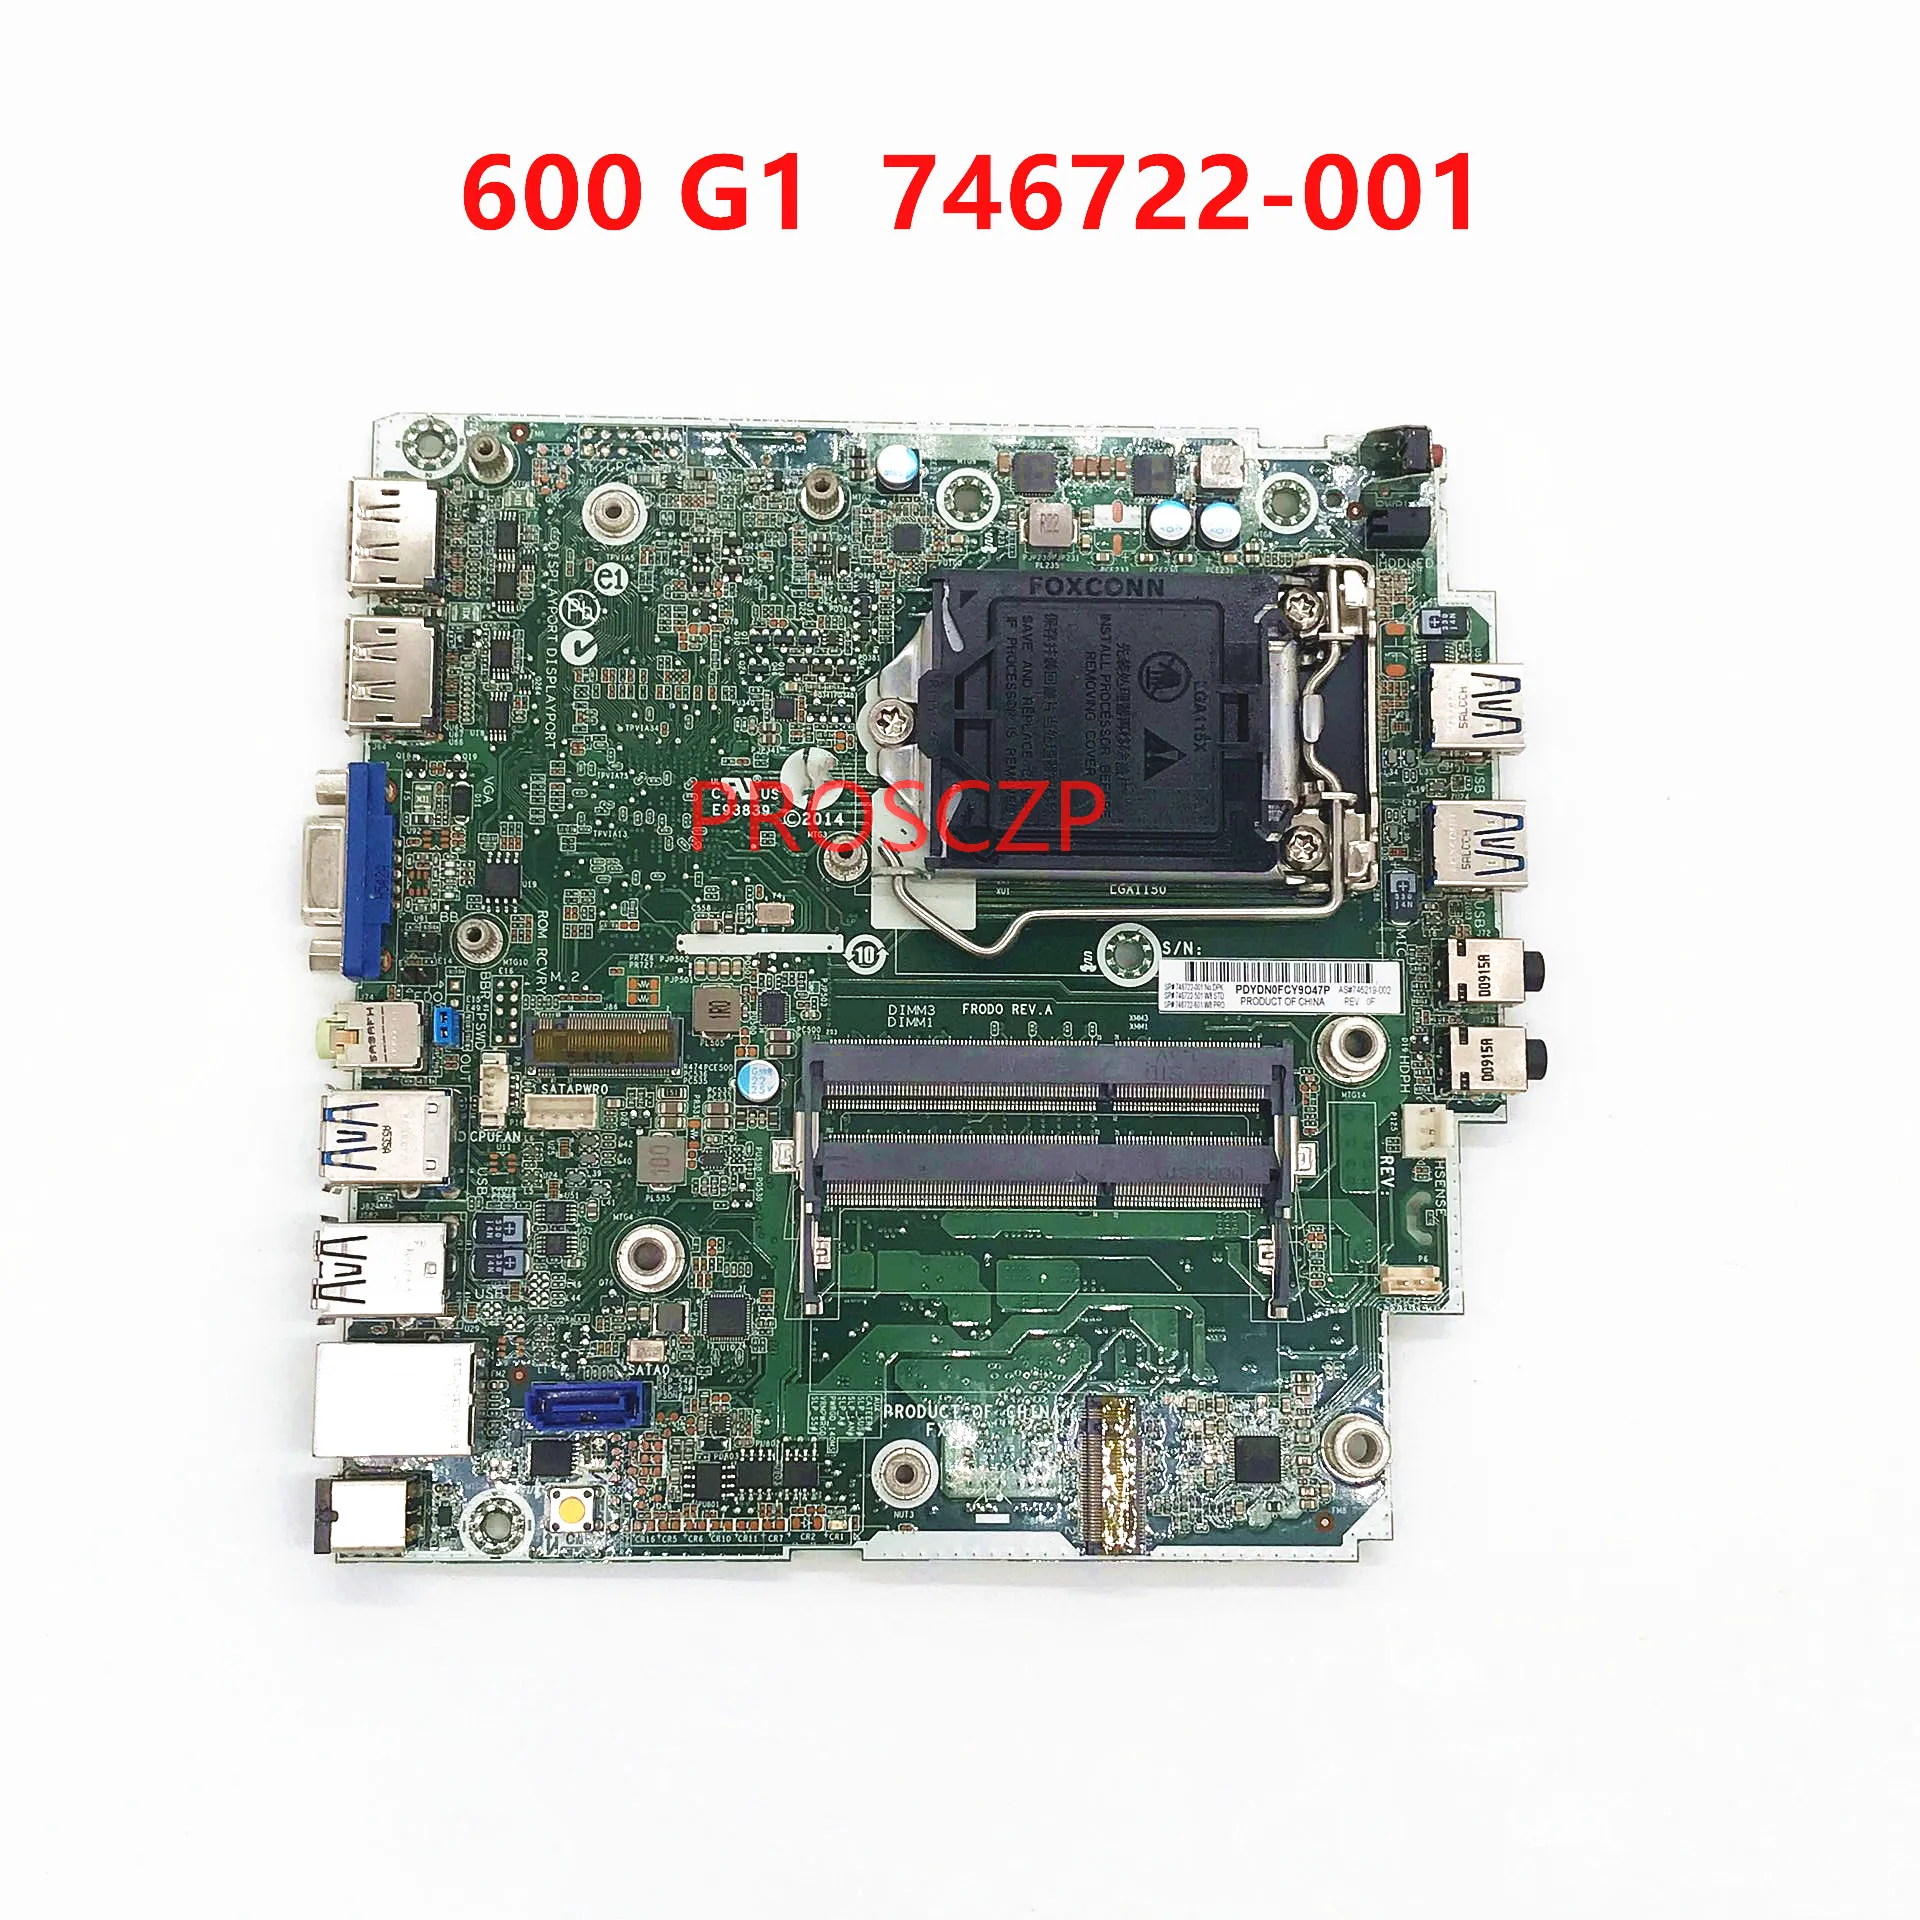 High Quality Mainboard For HP 600 G1 Laptop Motherboard 746722-001 746722-501 746722-601 746219-002 DDR3 100% Full Working Well